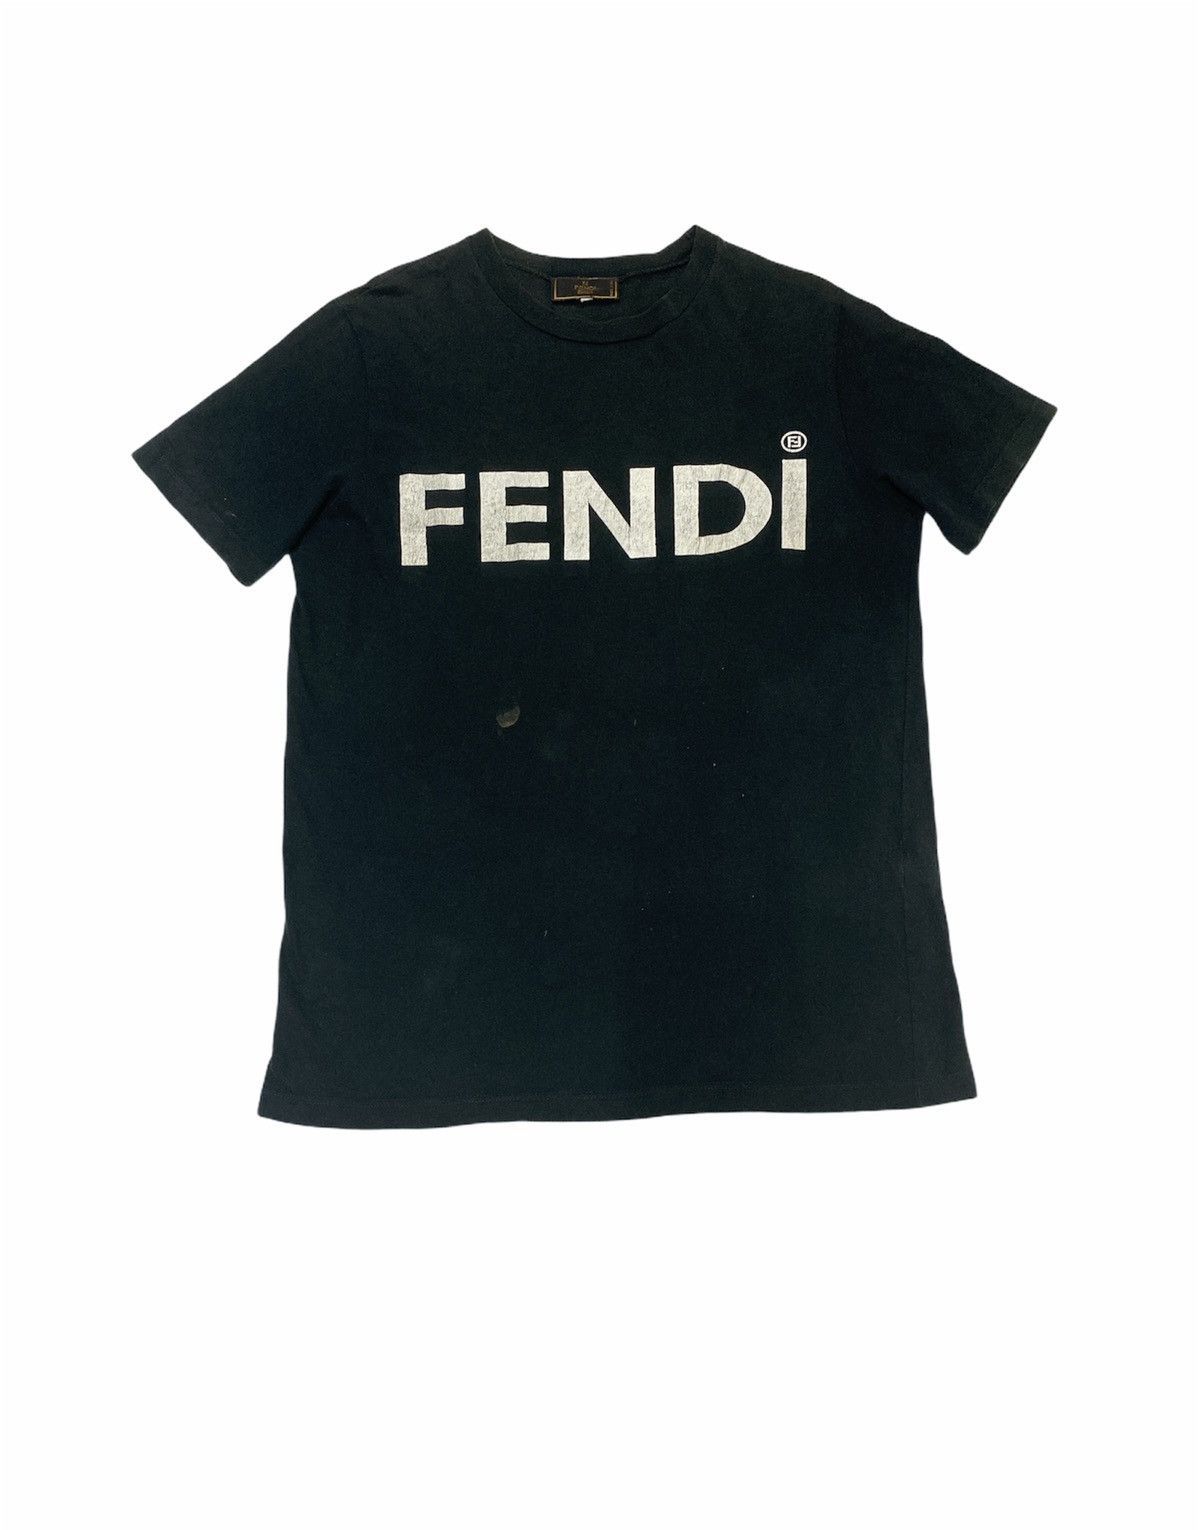 Vintage Vintage Fendi FF Logo Italy Embroidery Spell Out Tee Shirt